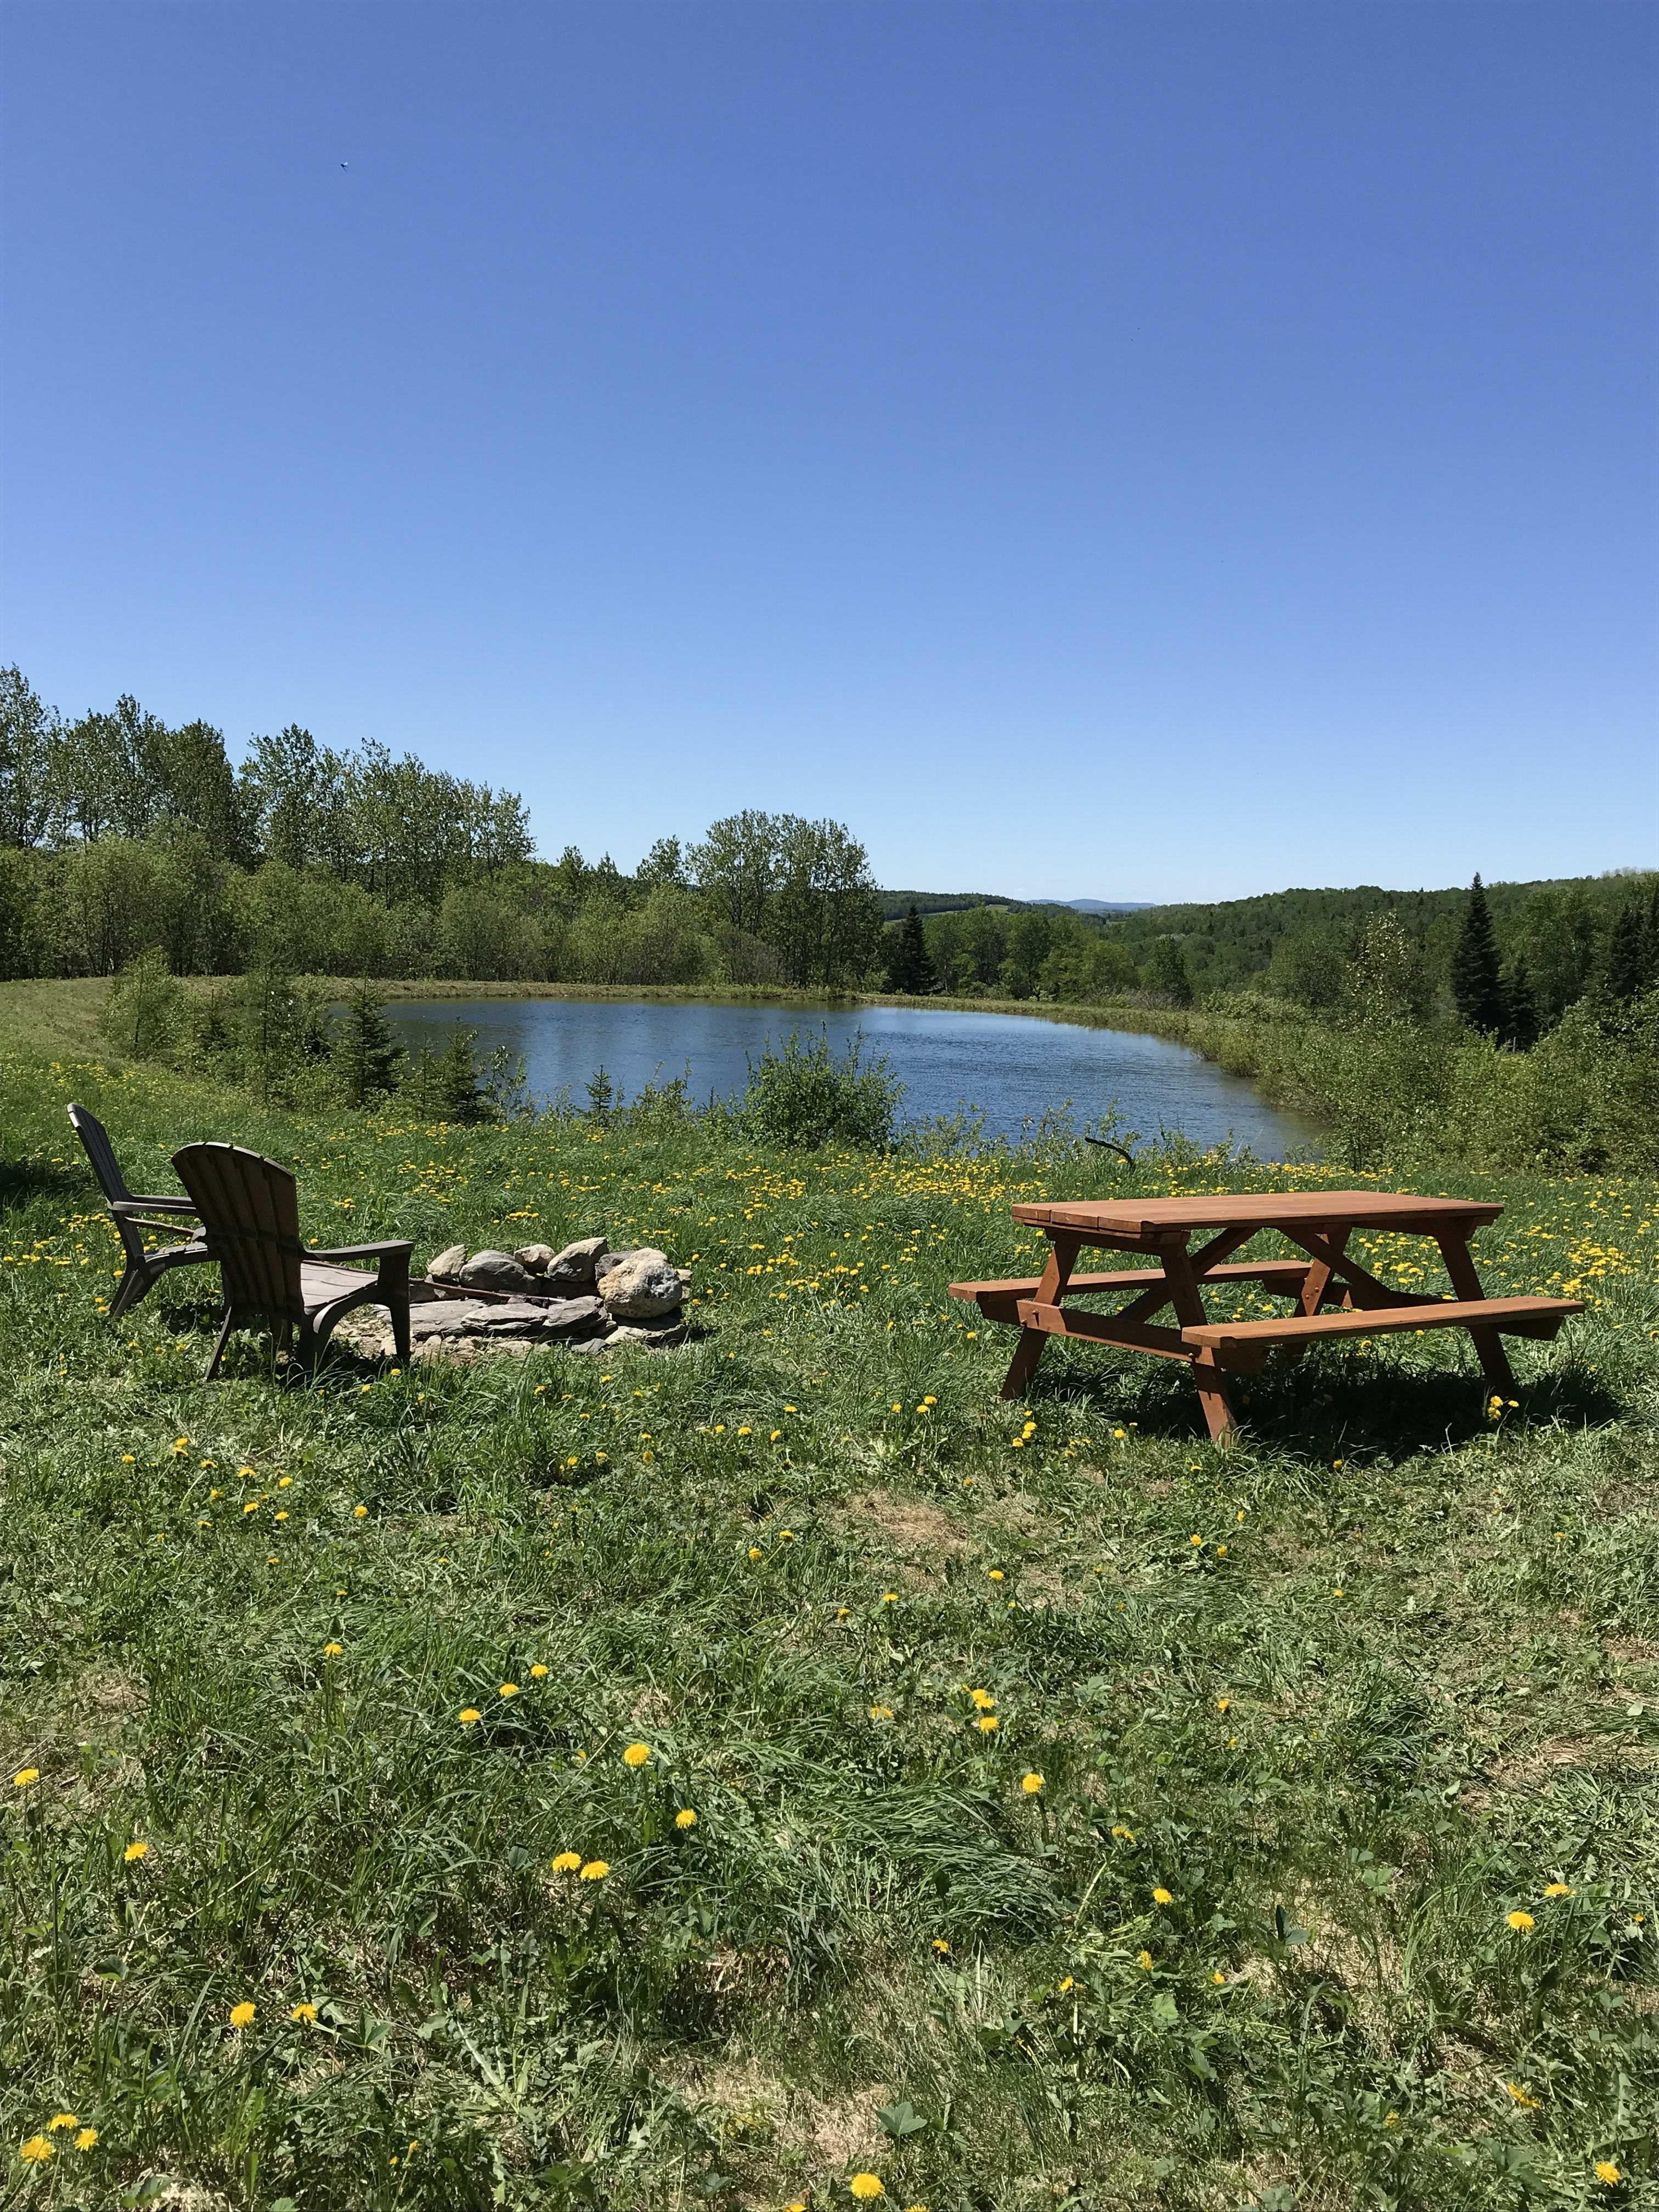 Spring pond campsite offers all the amenities for a fine camping experience complete with picnic table, fire pit and lounge chairs.